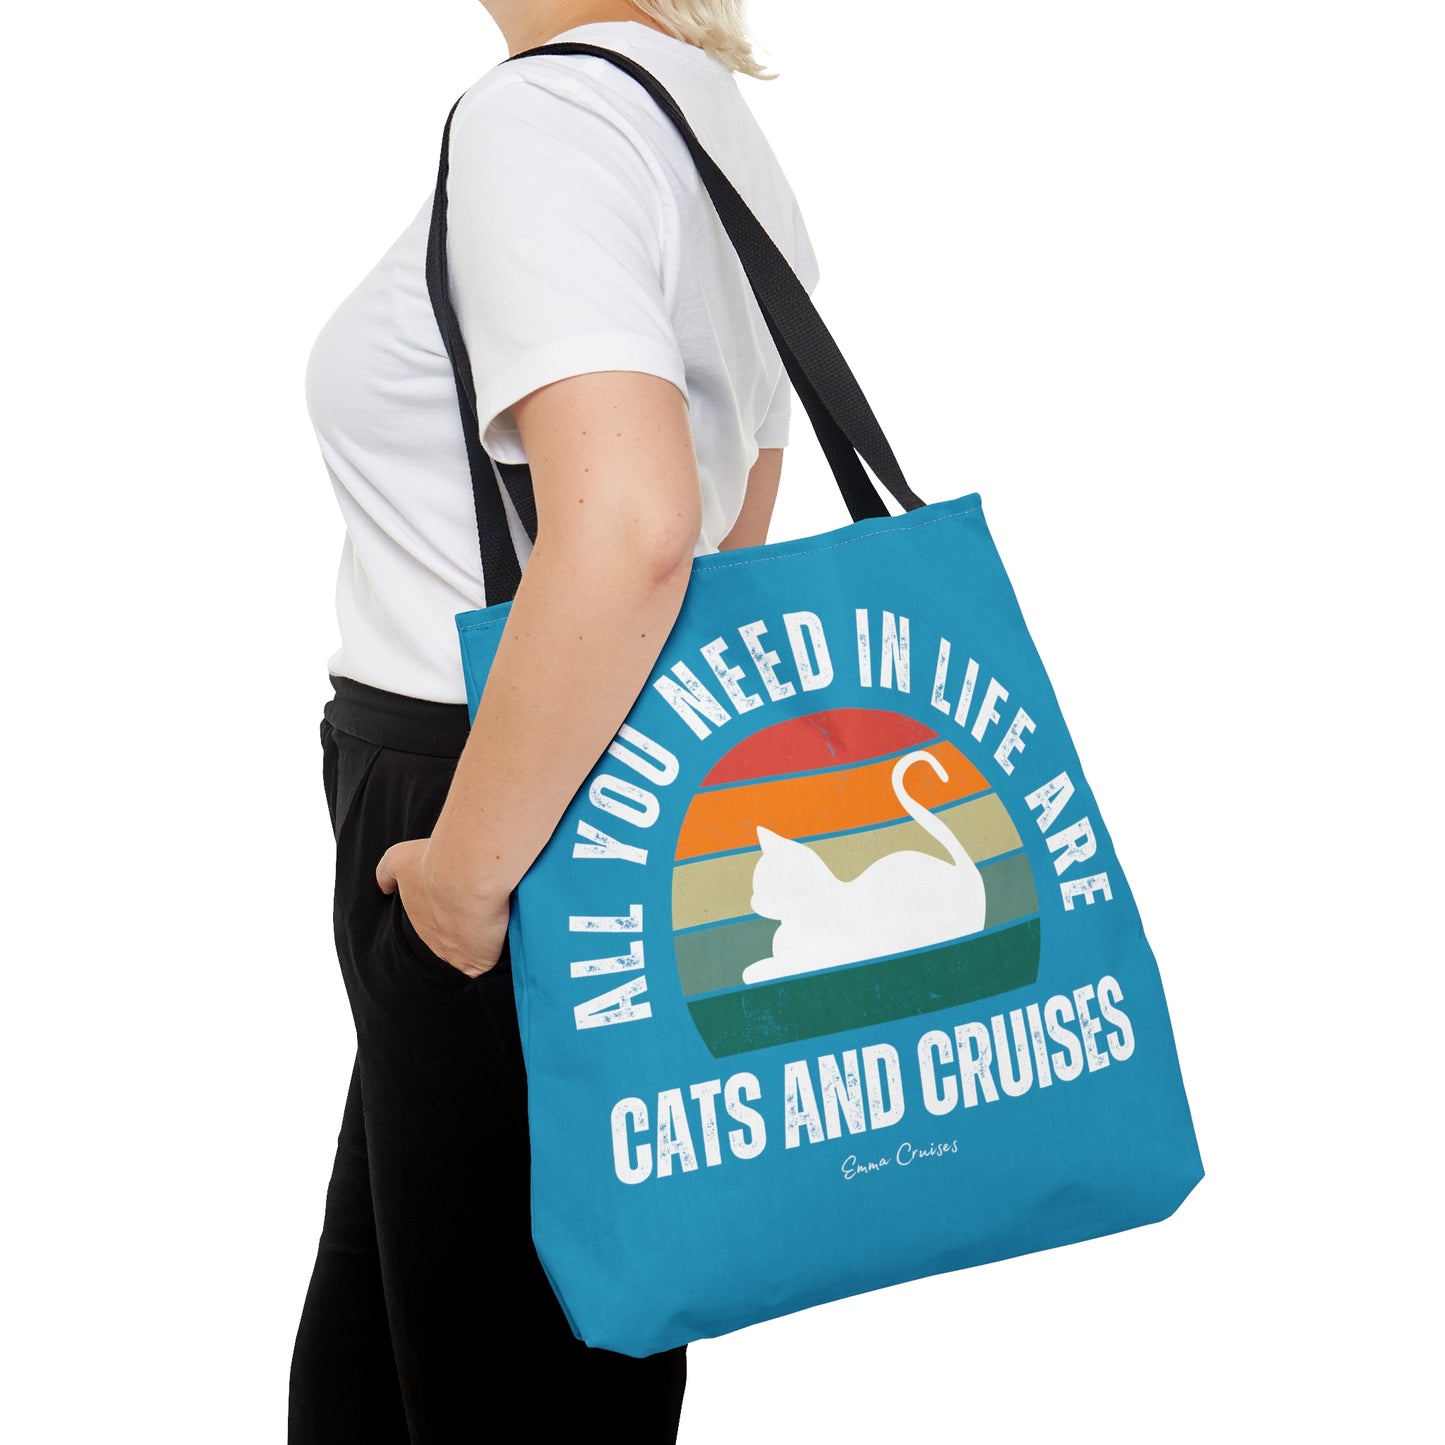 Cats and Cruises - Bag